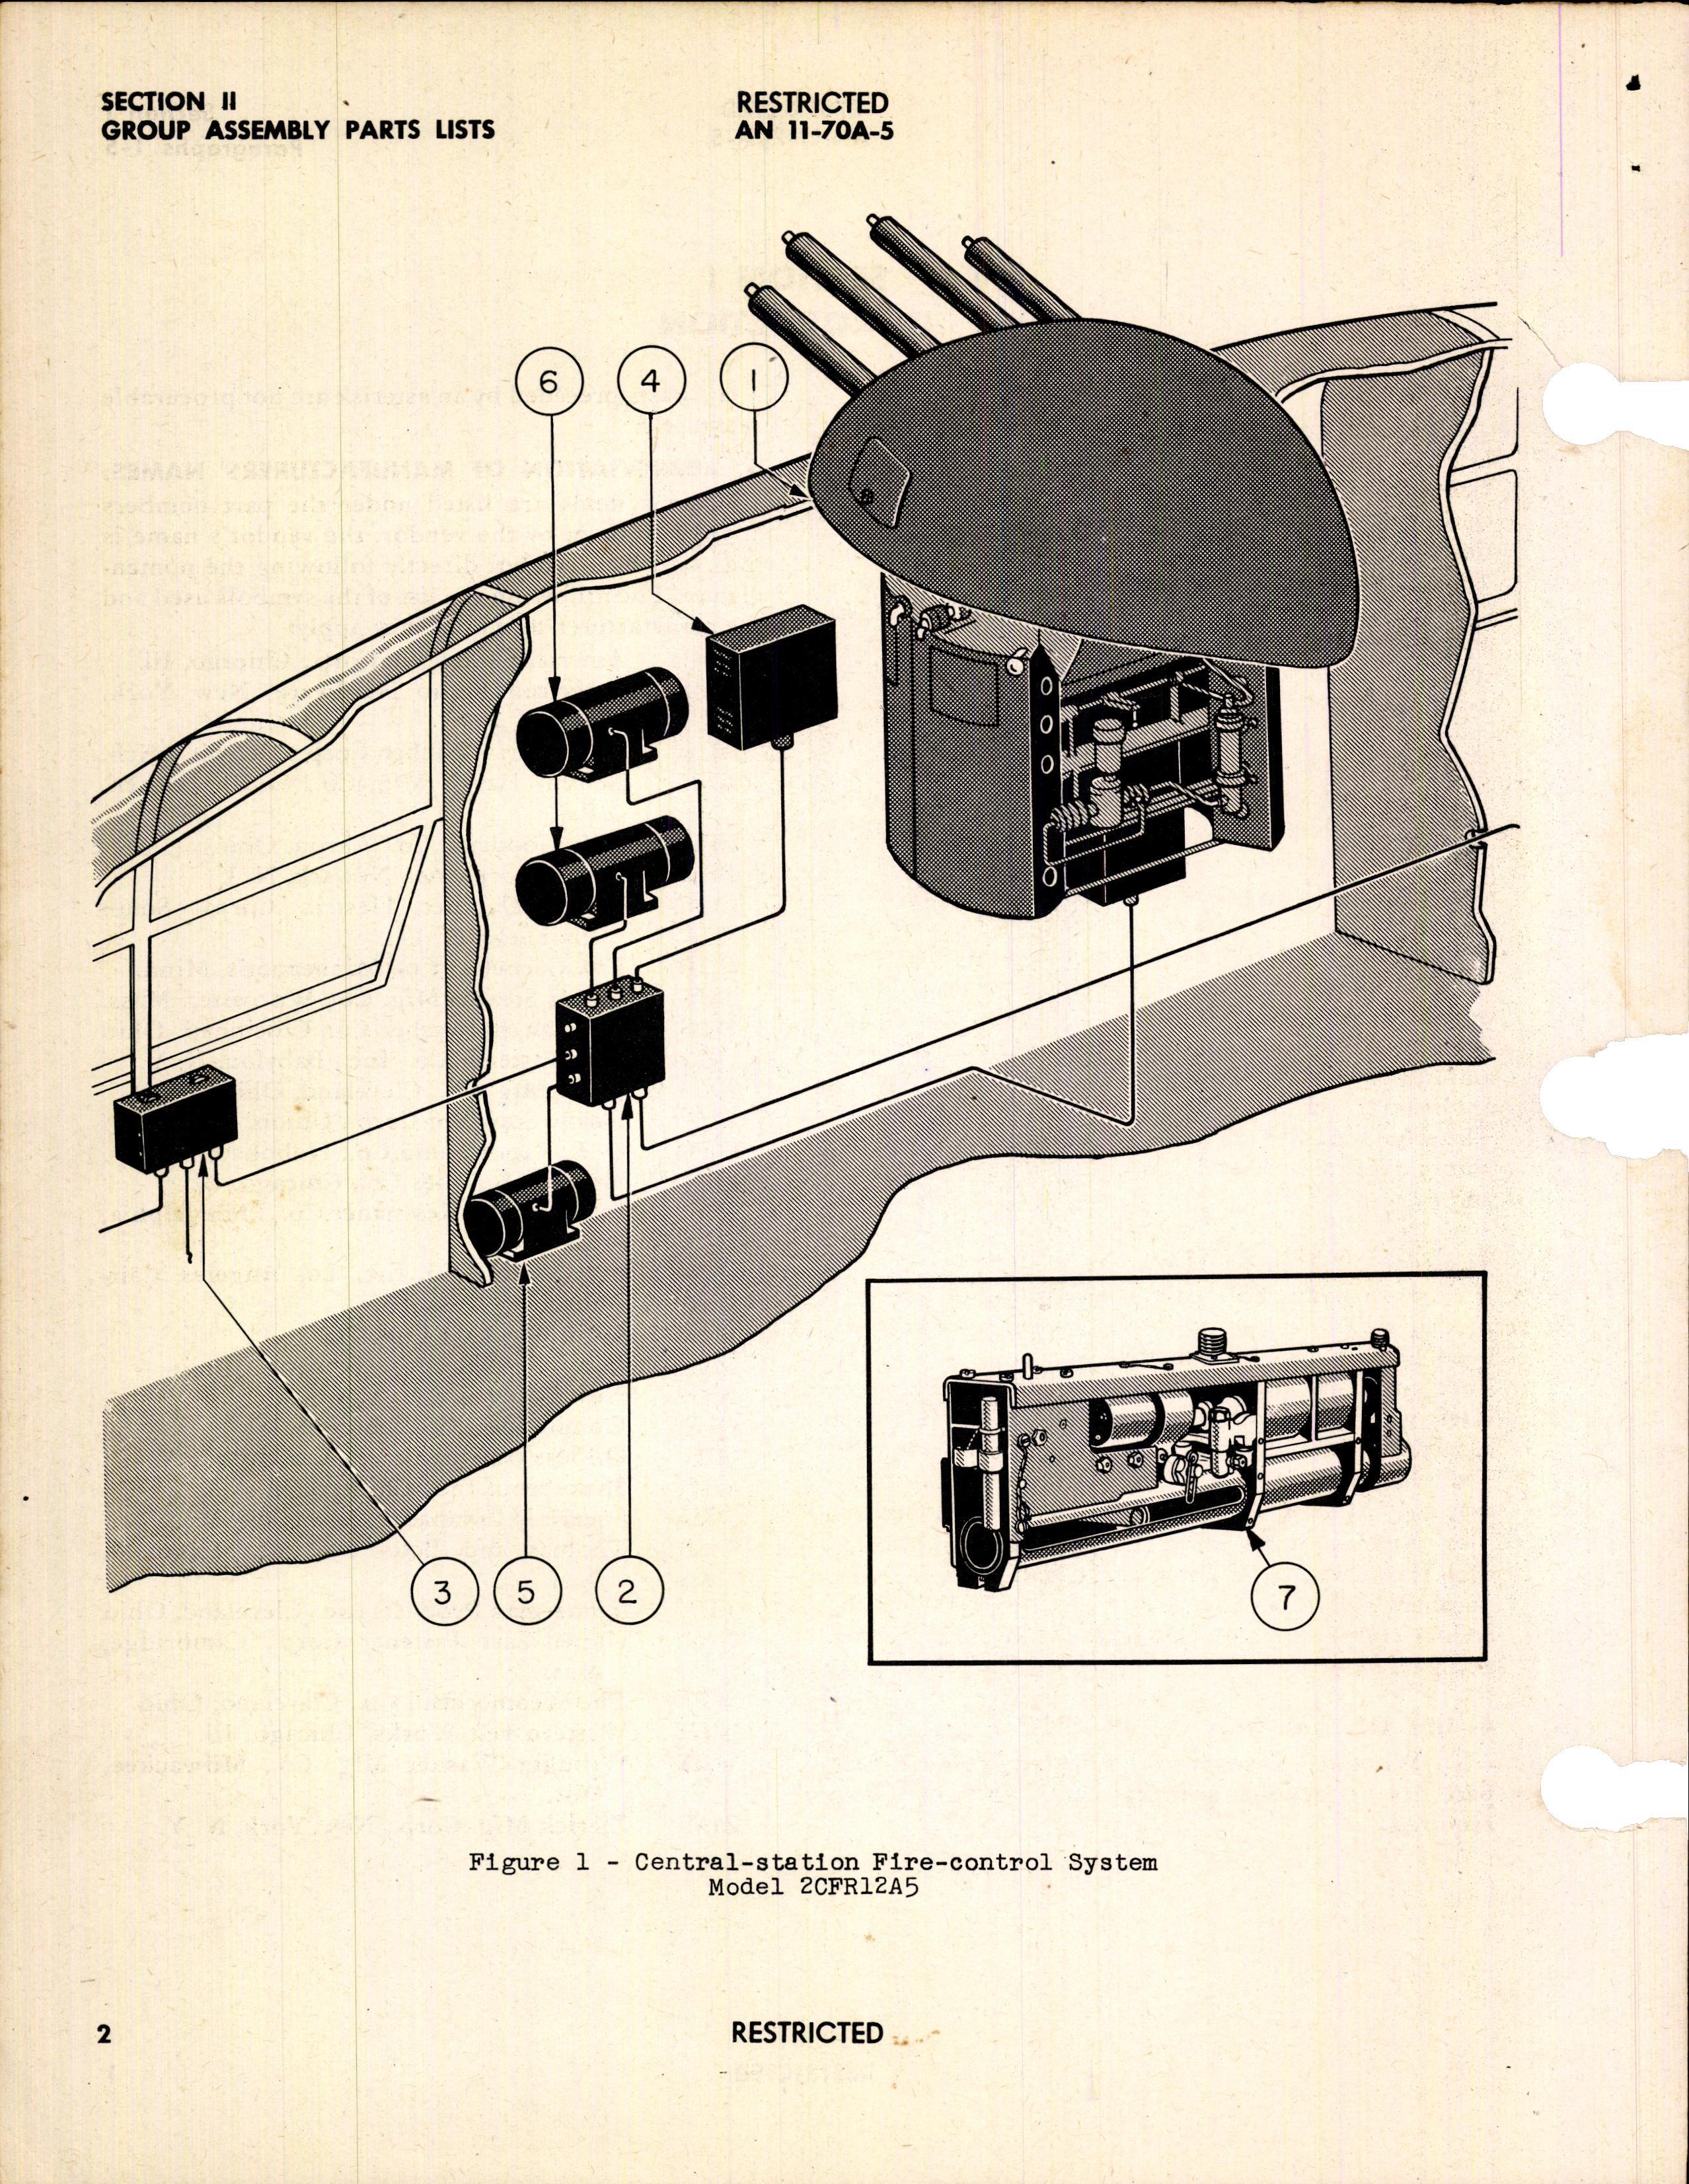 Sample page 6 from AirCorps Library document: Parts Catalog for Central-Station Fire-Control System for P-61 Aircraft